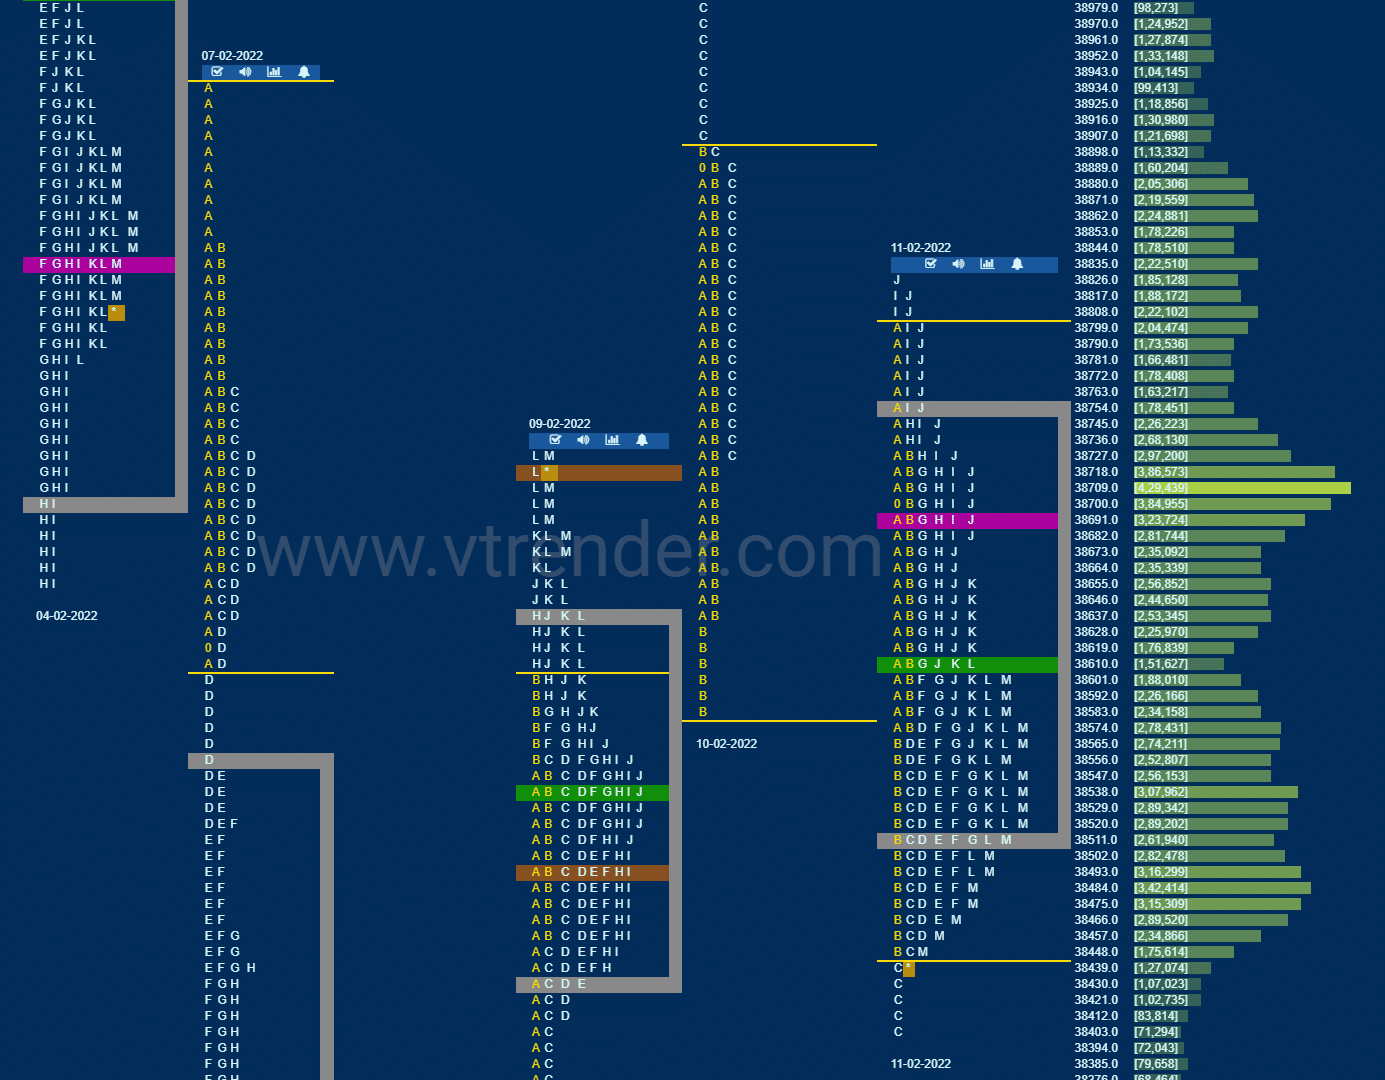 Bnf 8 Market Profile Analysis Dated 11Th February 2022 Banknifty Futures, Charts, Day Trading, Intraday Trading, Intraday Trading Strategies, Market Profile, Market Profile Trading Strategies, Nifty Futures, Order Flow Analysis, Support And Resistance, Technical Analysis, Trading Strategies, Volume Profile Trading